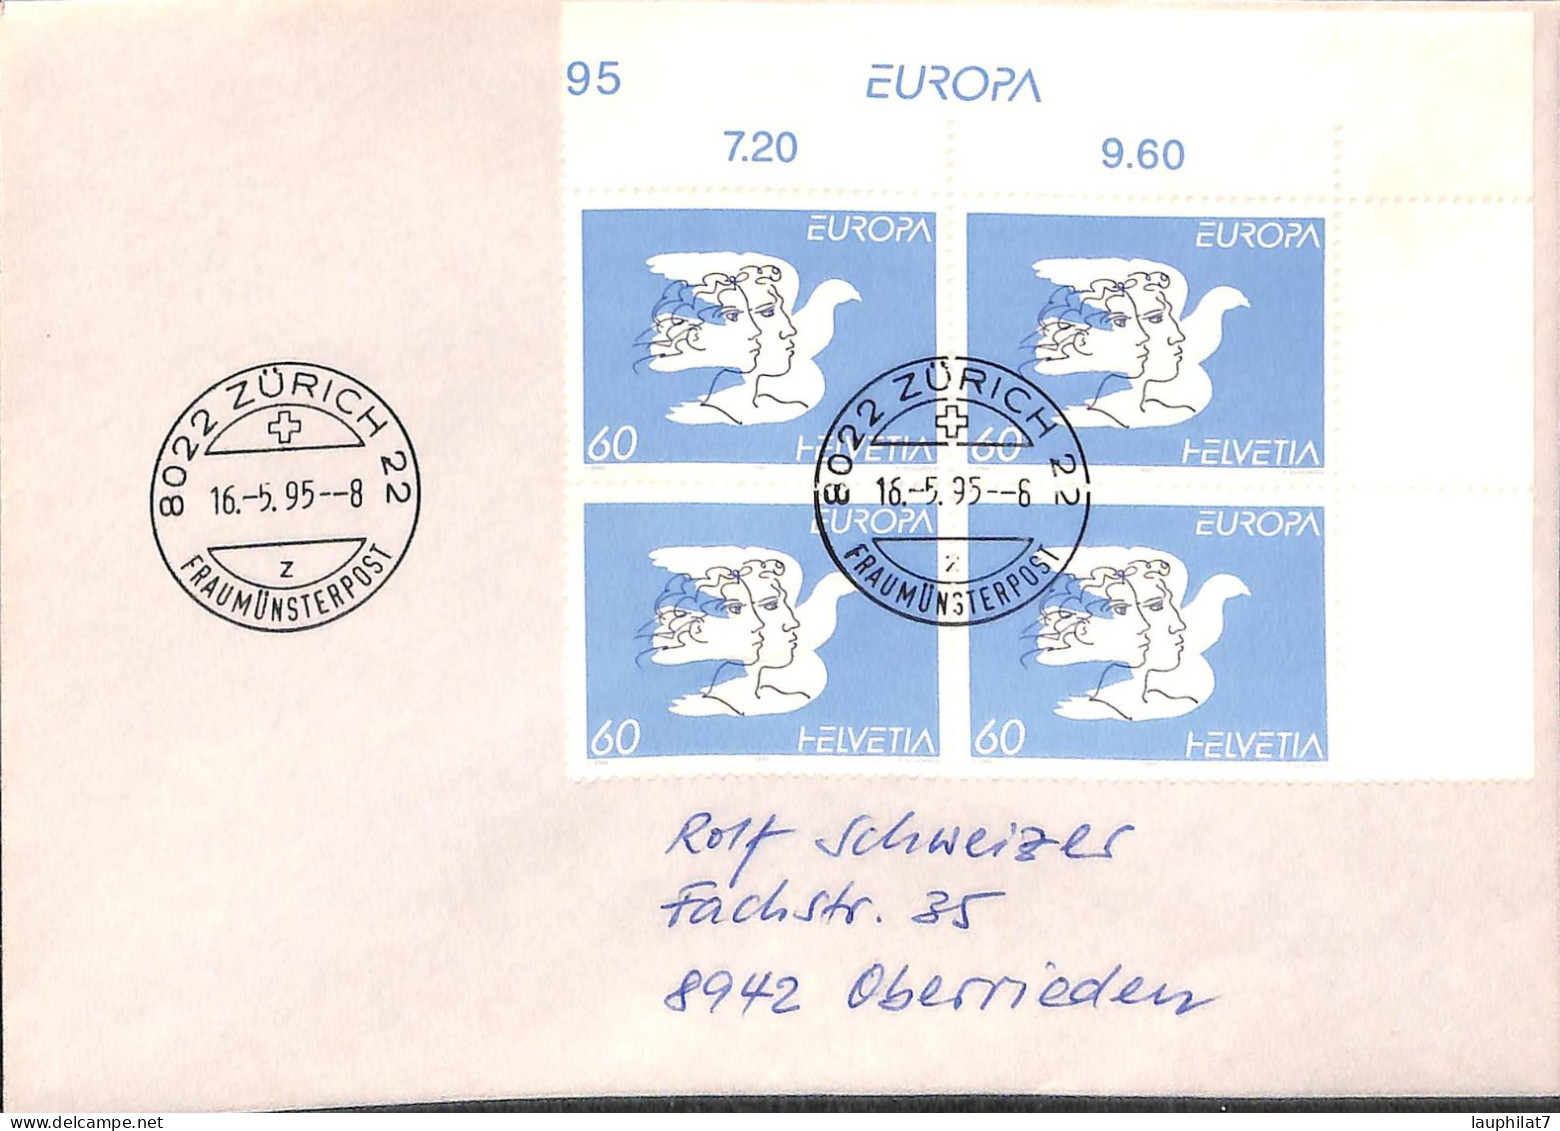 [900881]TB//-Suisse 1995 - FDC, Documents, Europa-Cept - 1995